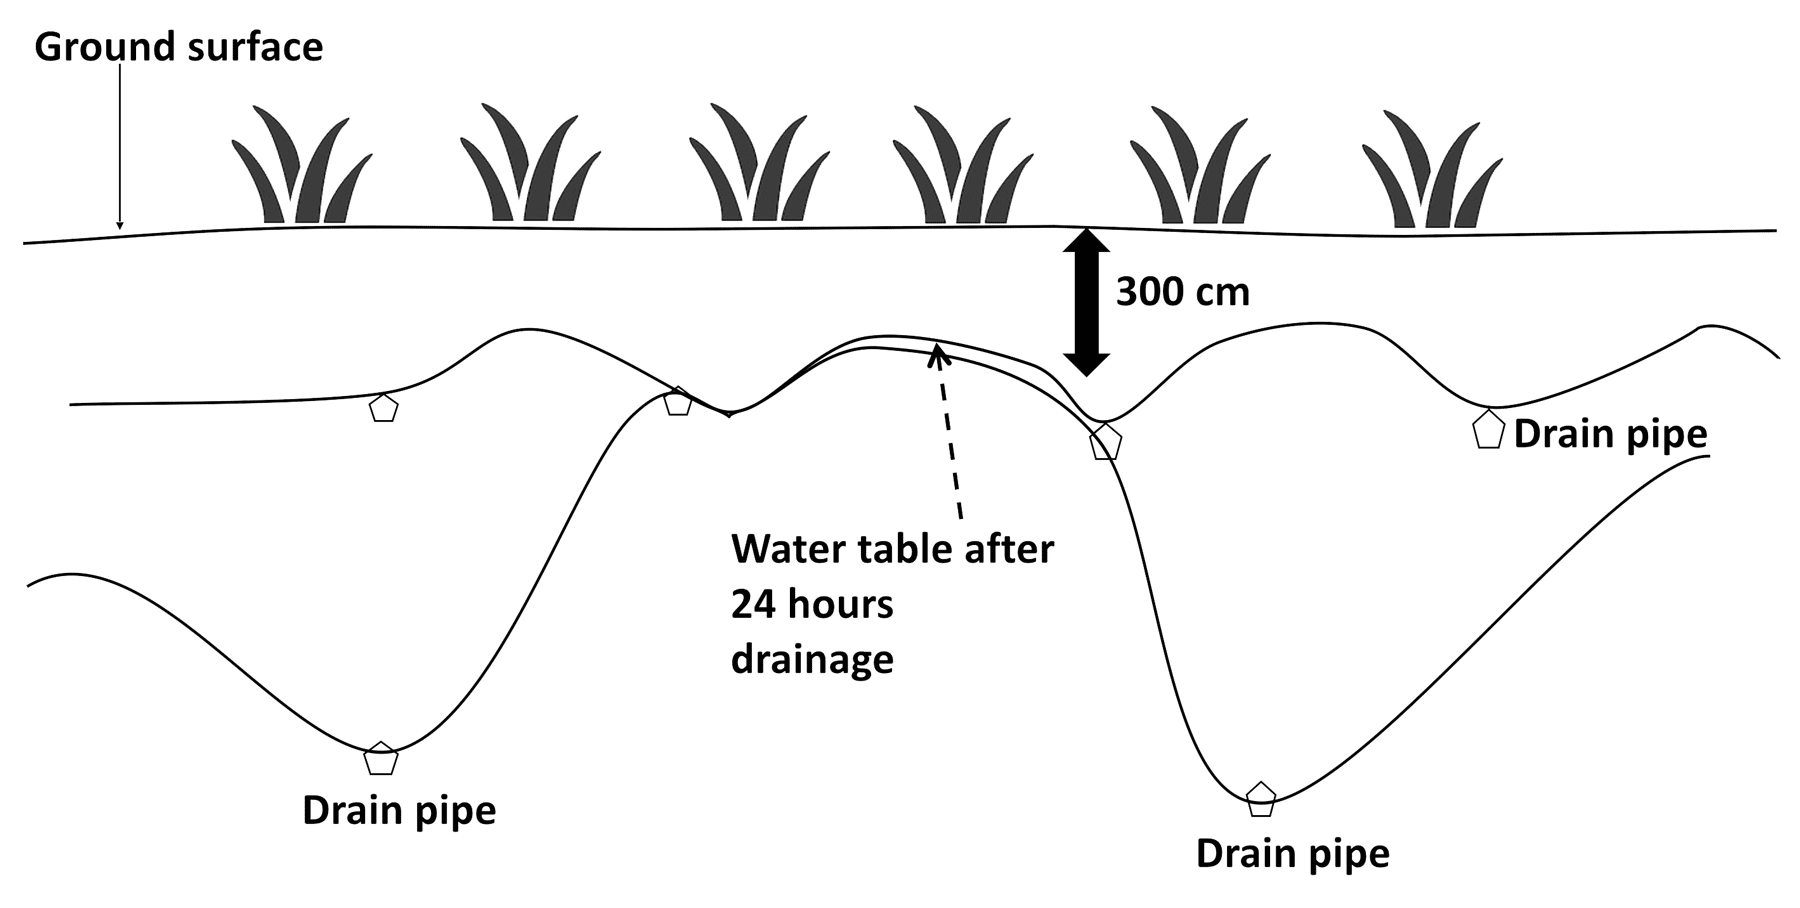 Diagram showing ground surface and placement of drain pipes. The diagram indicates that the water table should be at least 300 mm below ground surface after 24 hours drainage.